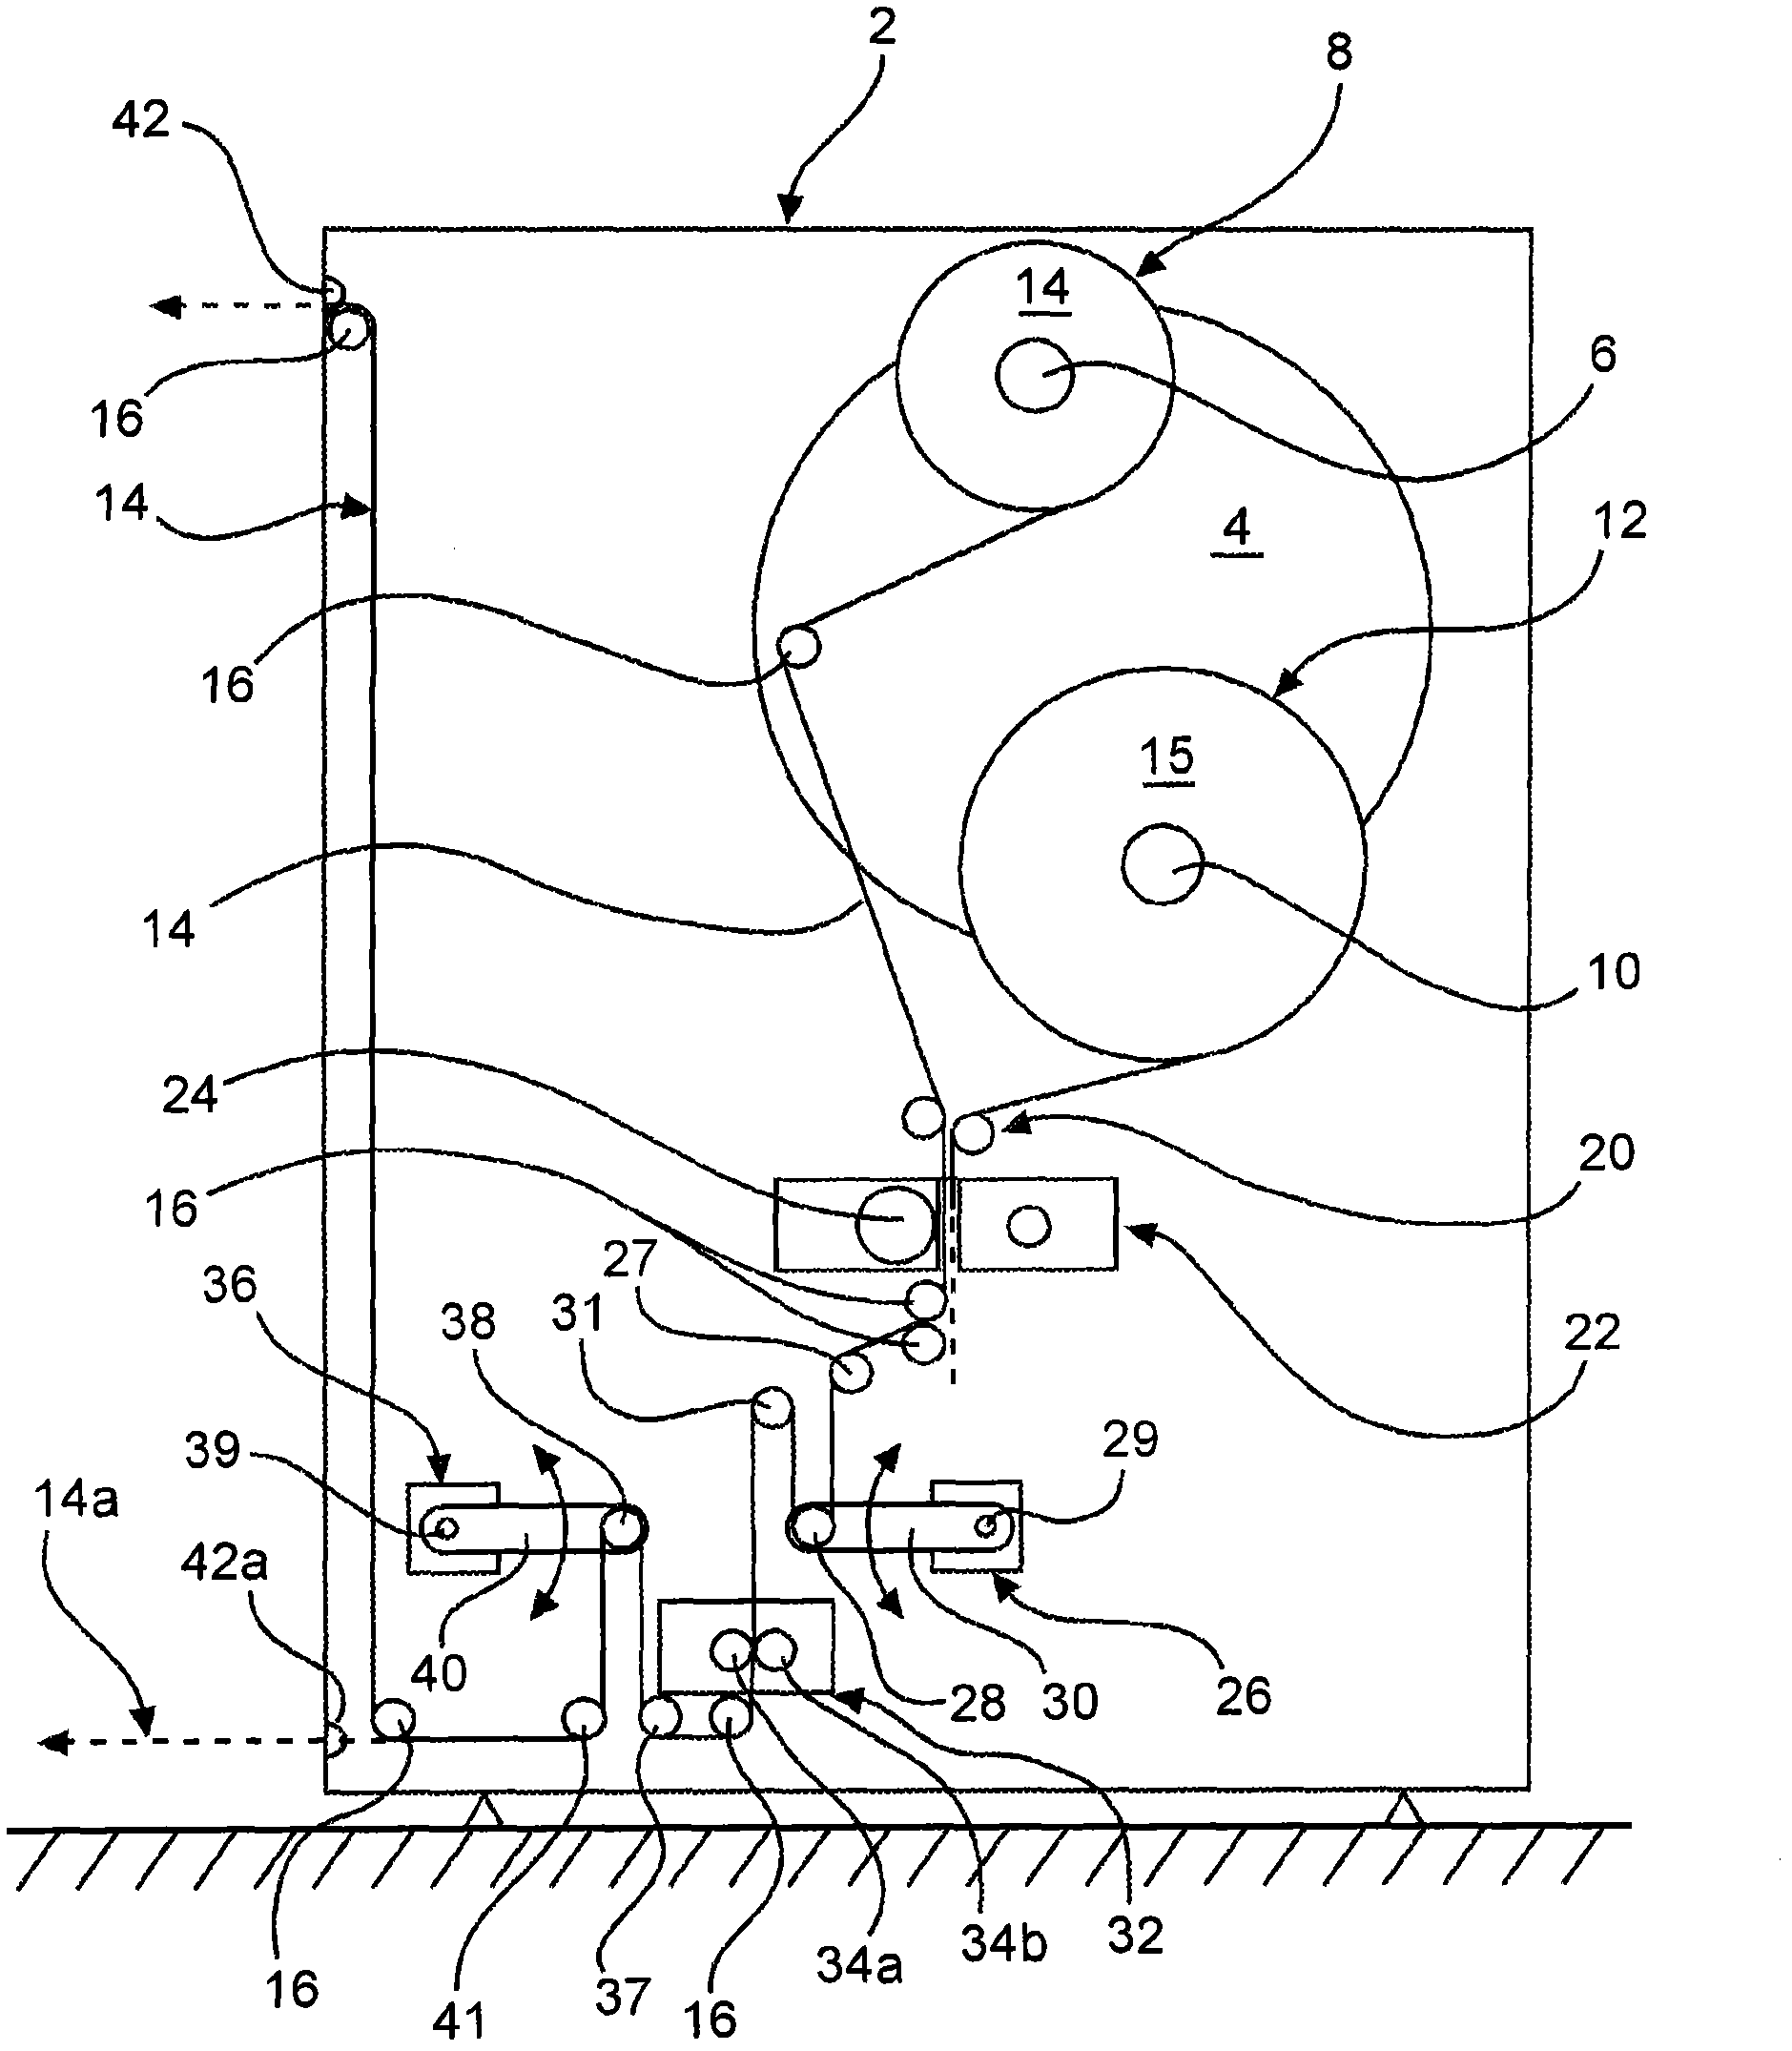 Bobbin rolling device for the tobacco processing industry